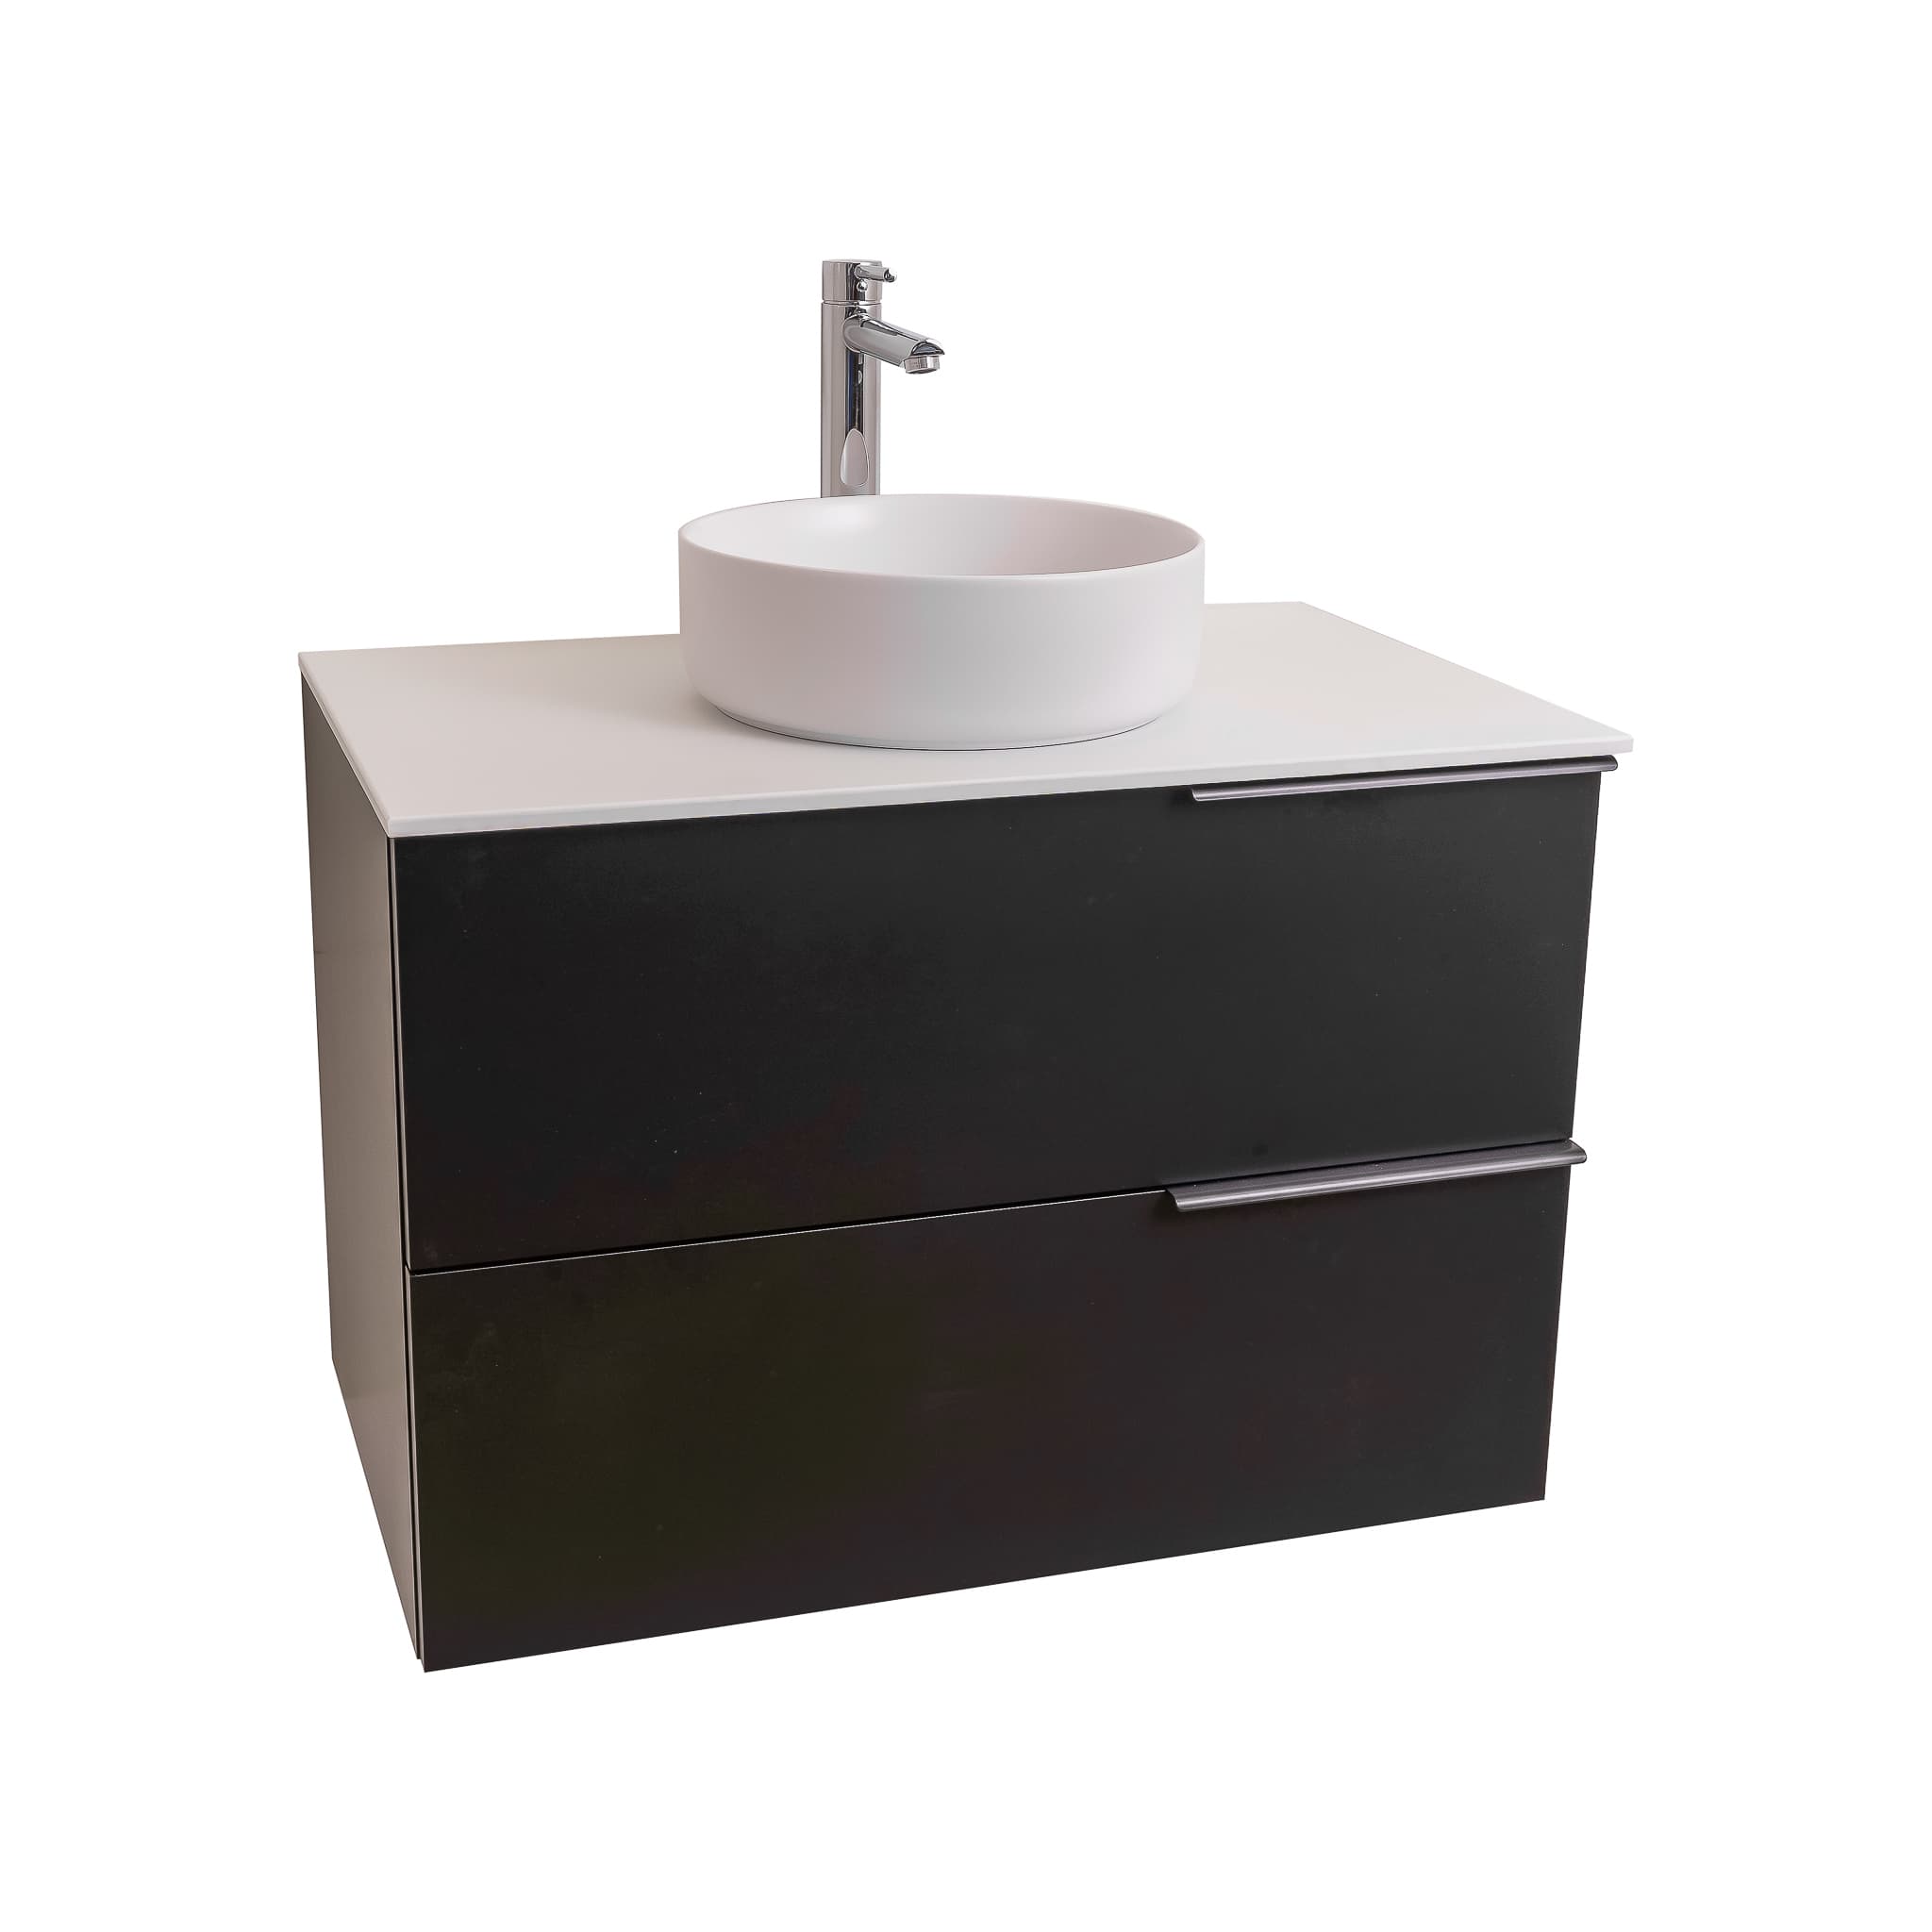 Mallorca 39.5 Matte Black Cabinet, Ares White Top And Ares White Ceramic Basin, Wall Mounted Modern Vanity Set